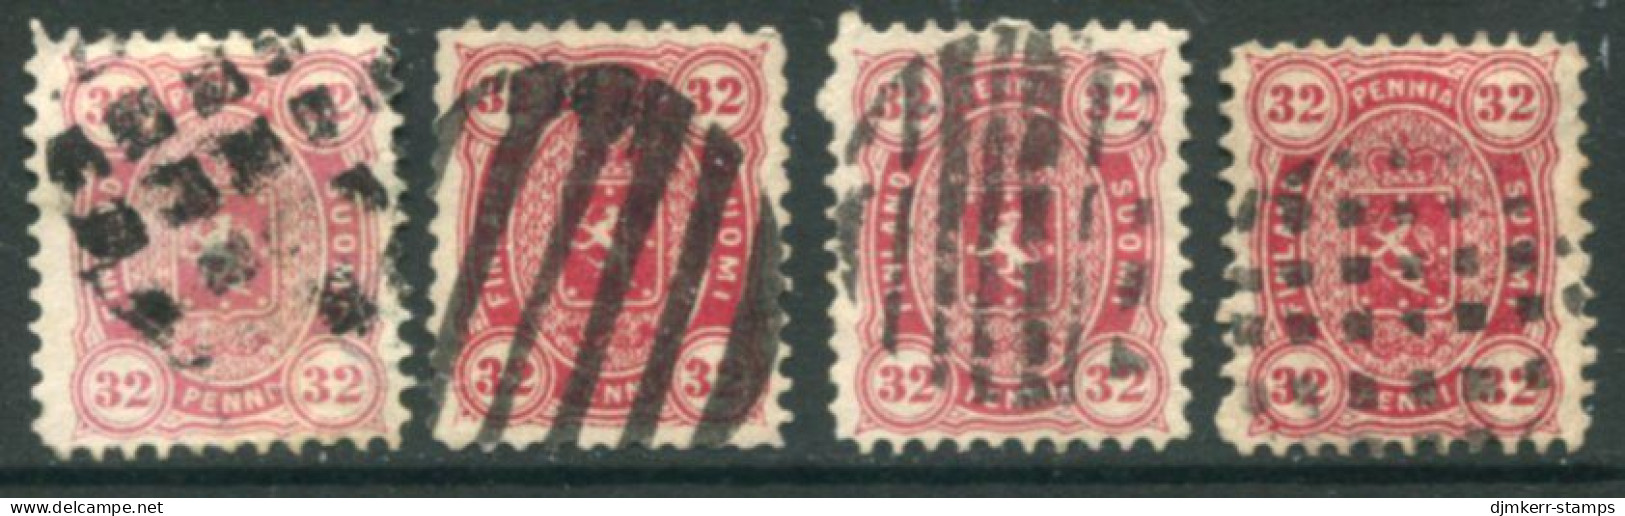 FINLAND 1875 32 P. Perforated 11 Used With Cork Or Wooden Cancellers (4).  Michel 18 Ax-y - Gebruikt